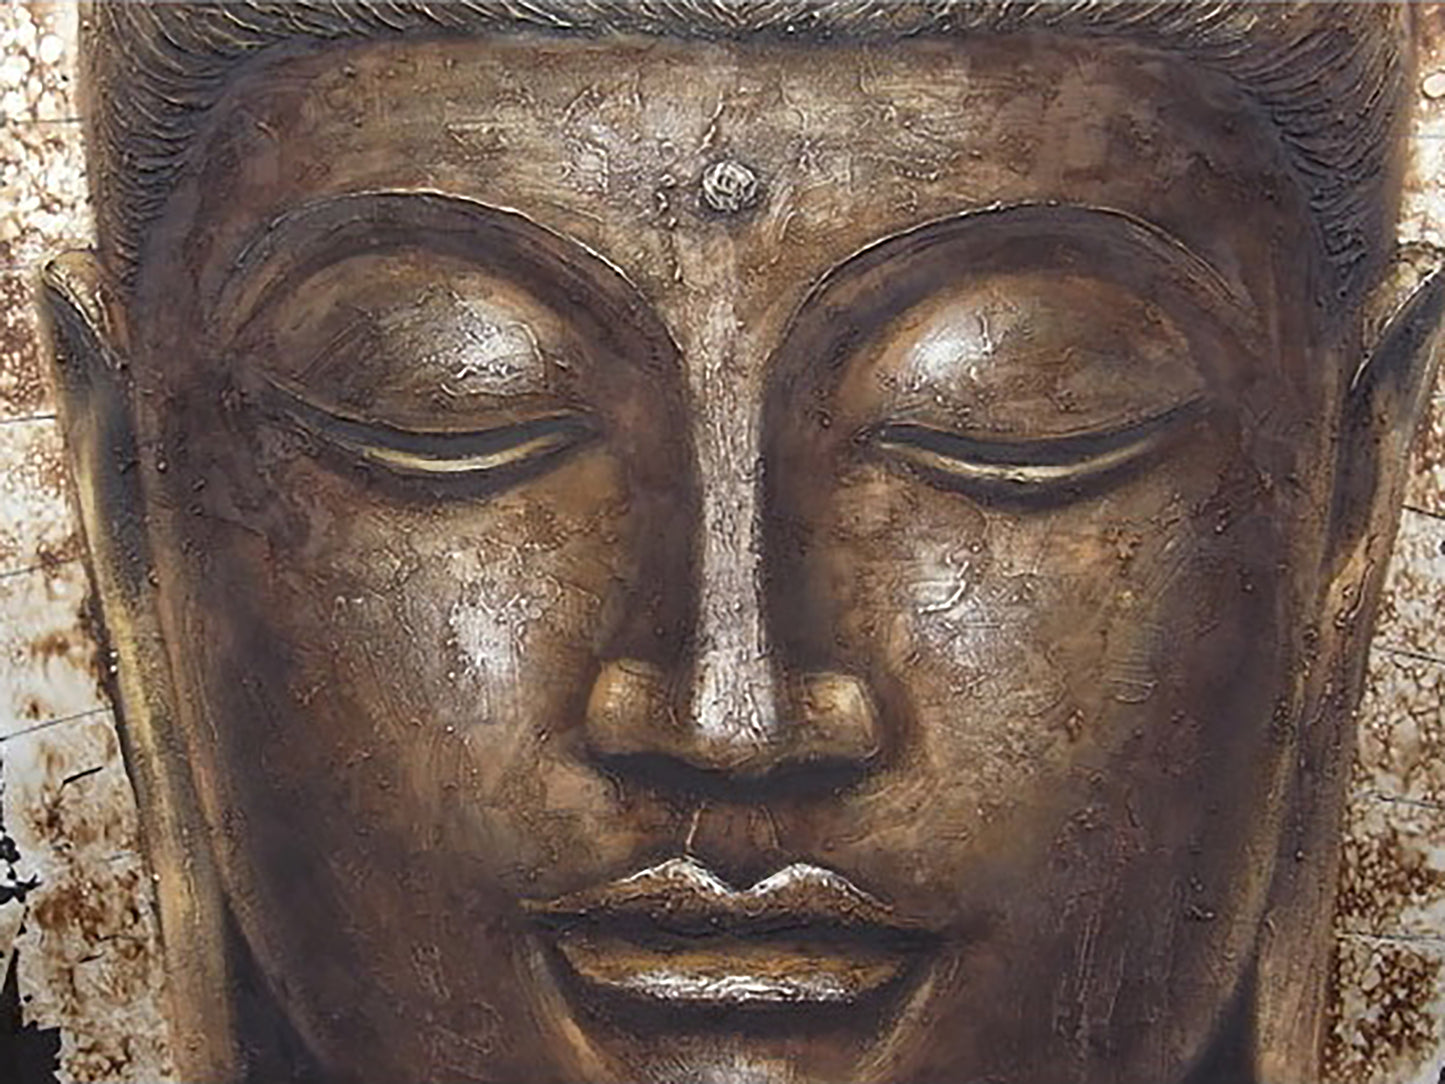 Hand Painted "Buddha" Oil on Canvas Original, Canvas Wall Art for Living Room, Bedroom, Office, Bar - Wrapped Canvas Art